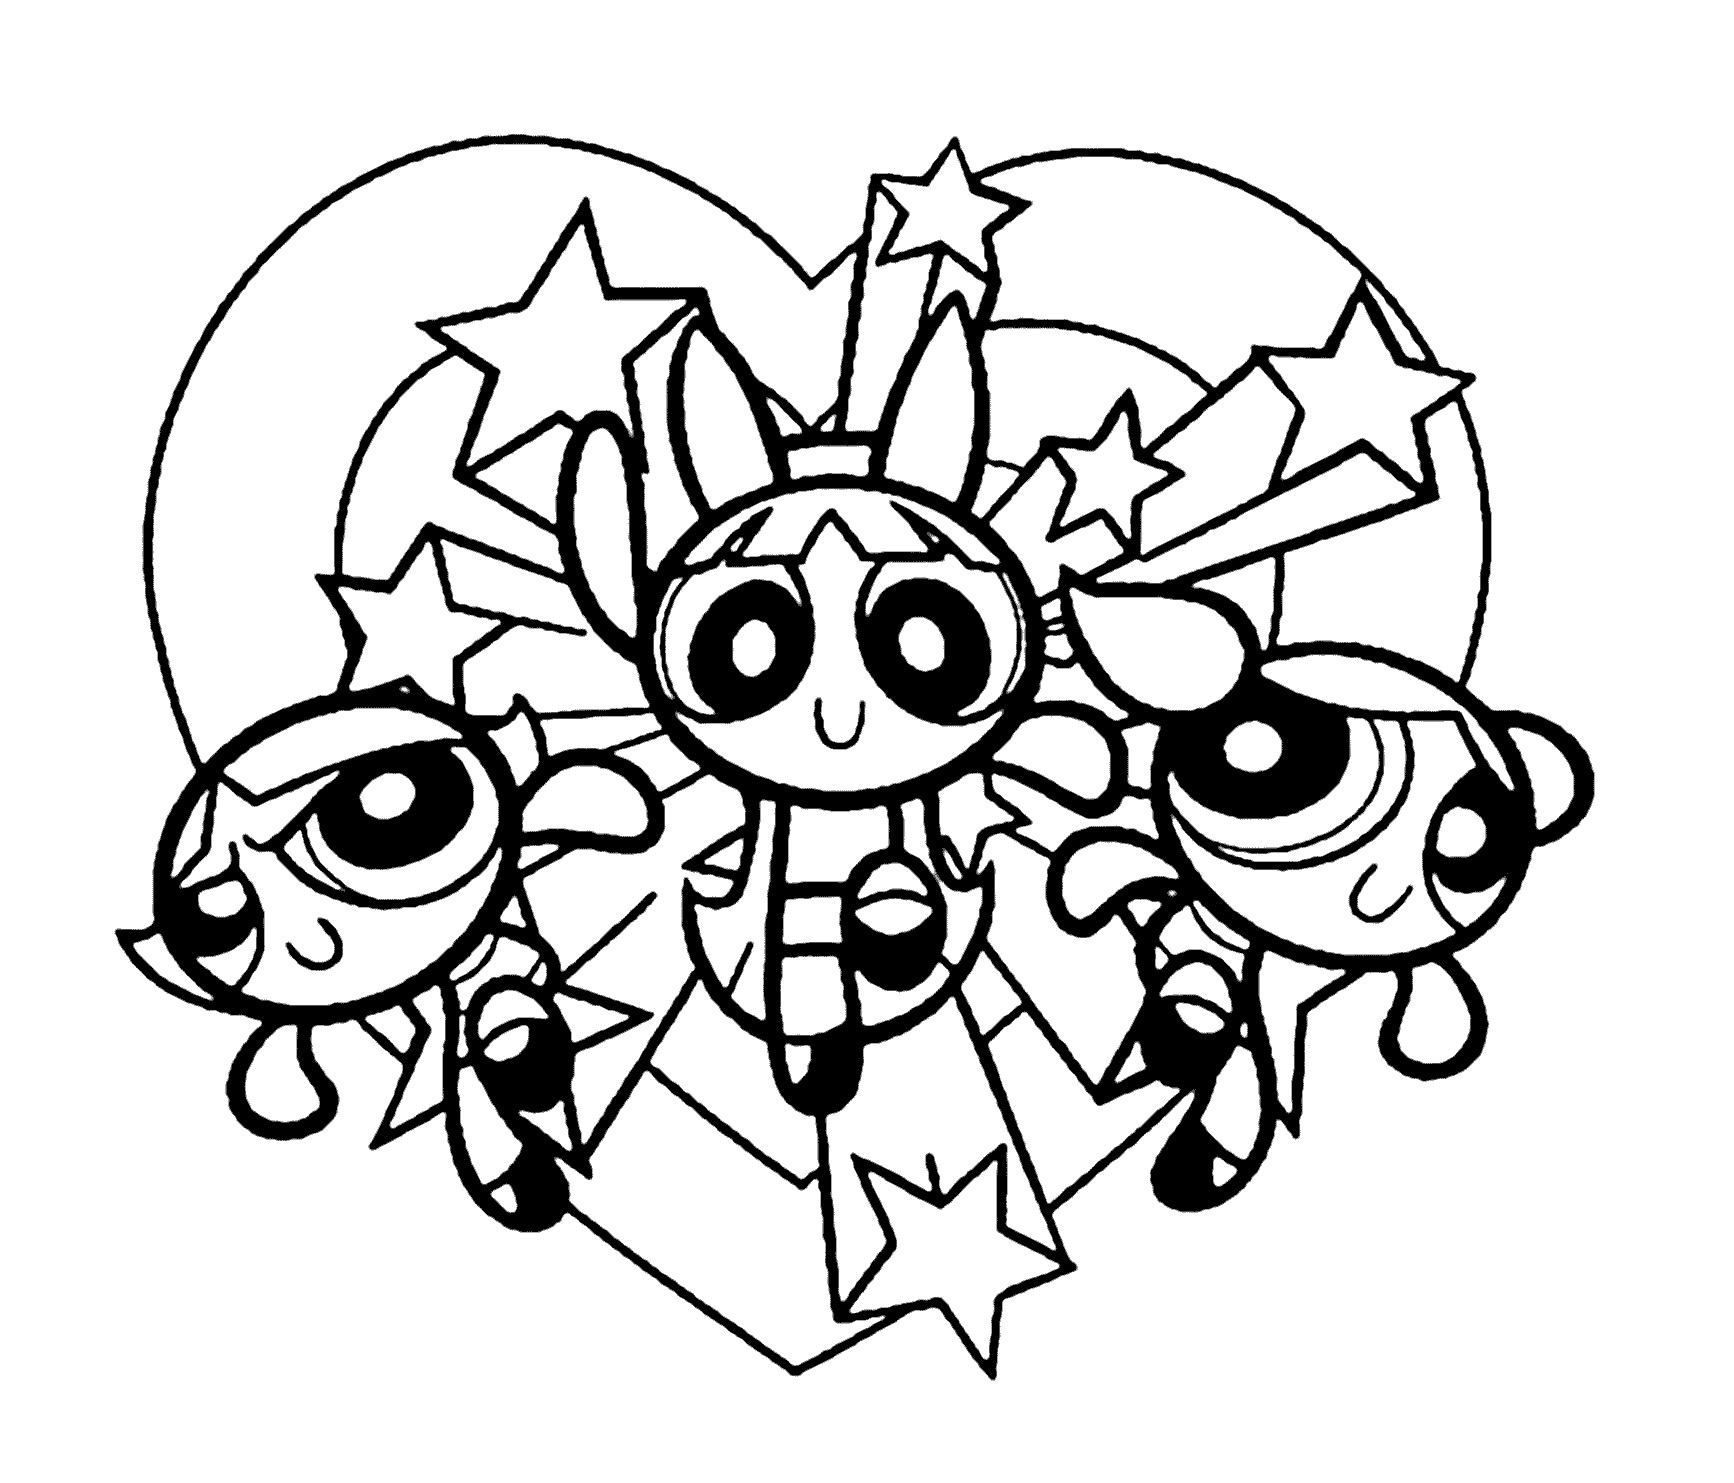 Powerpuff Girls Coloring Book
 12 printable pictures of powerpuff girls page Print